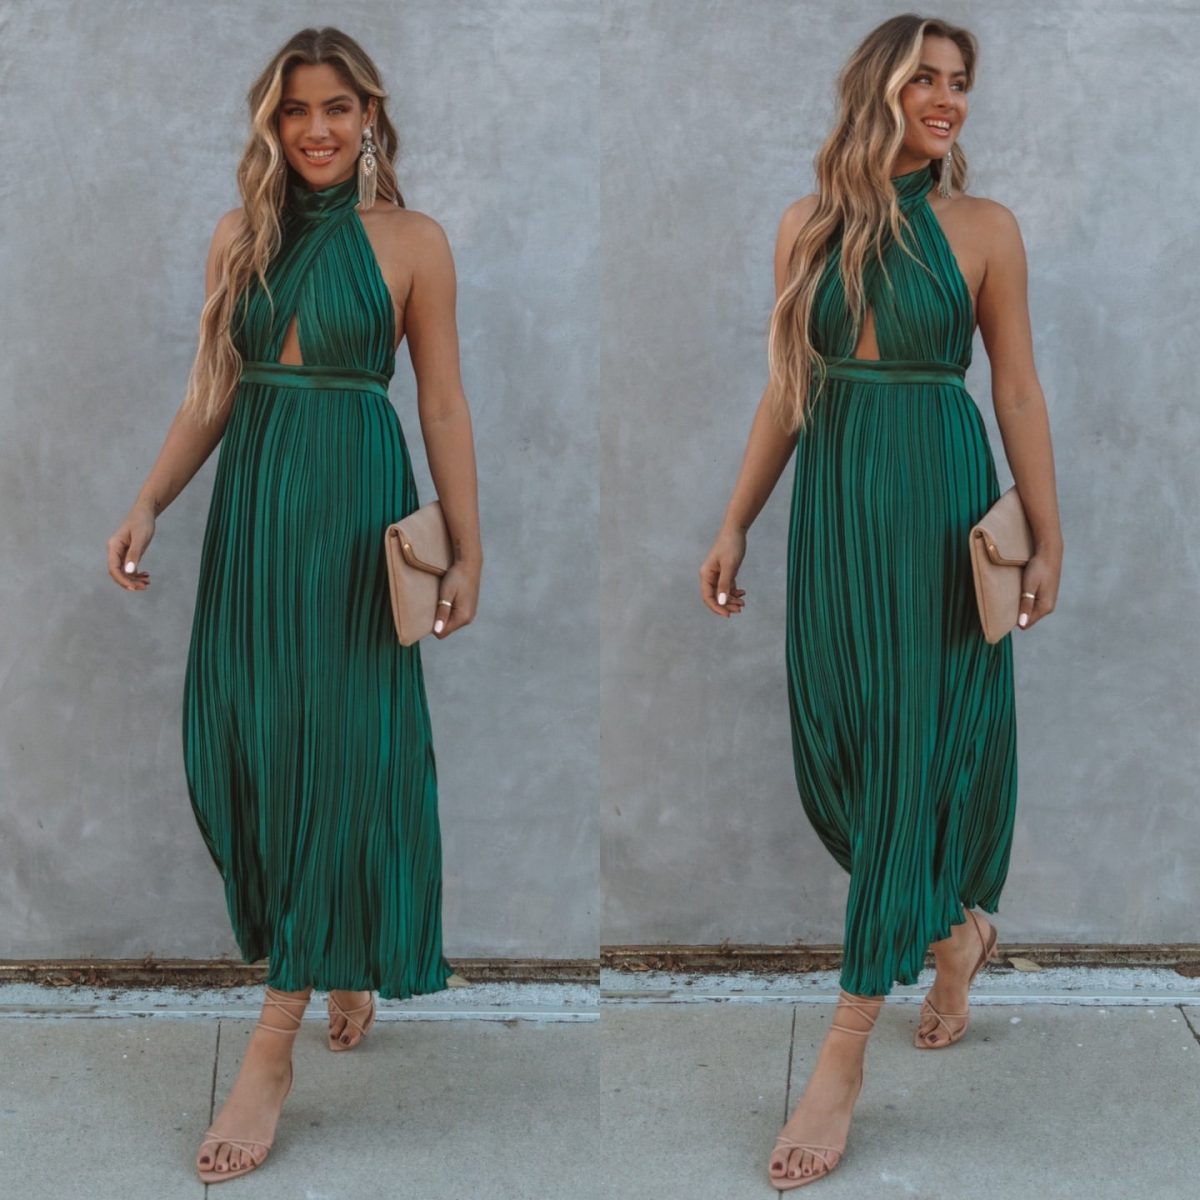 Fashion early Autumn  Halter Backless Pleated Dress in Dresses